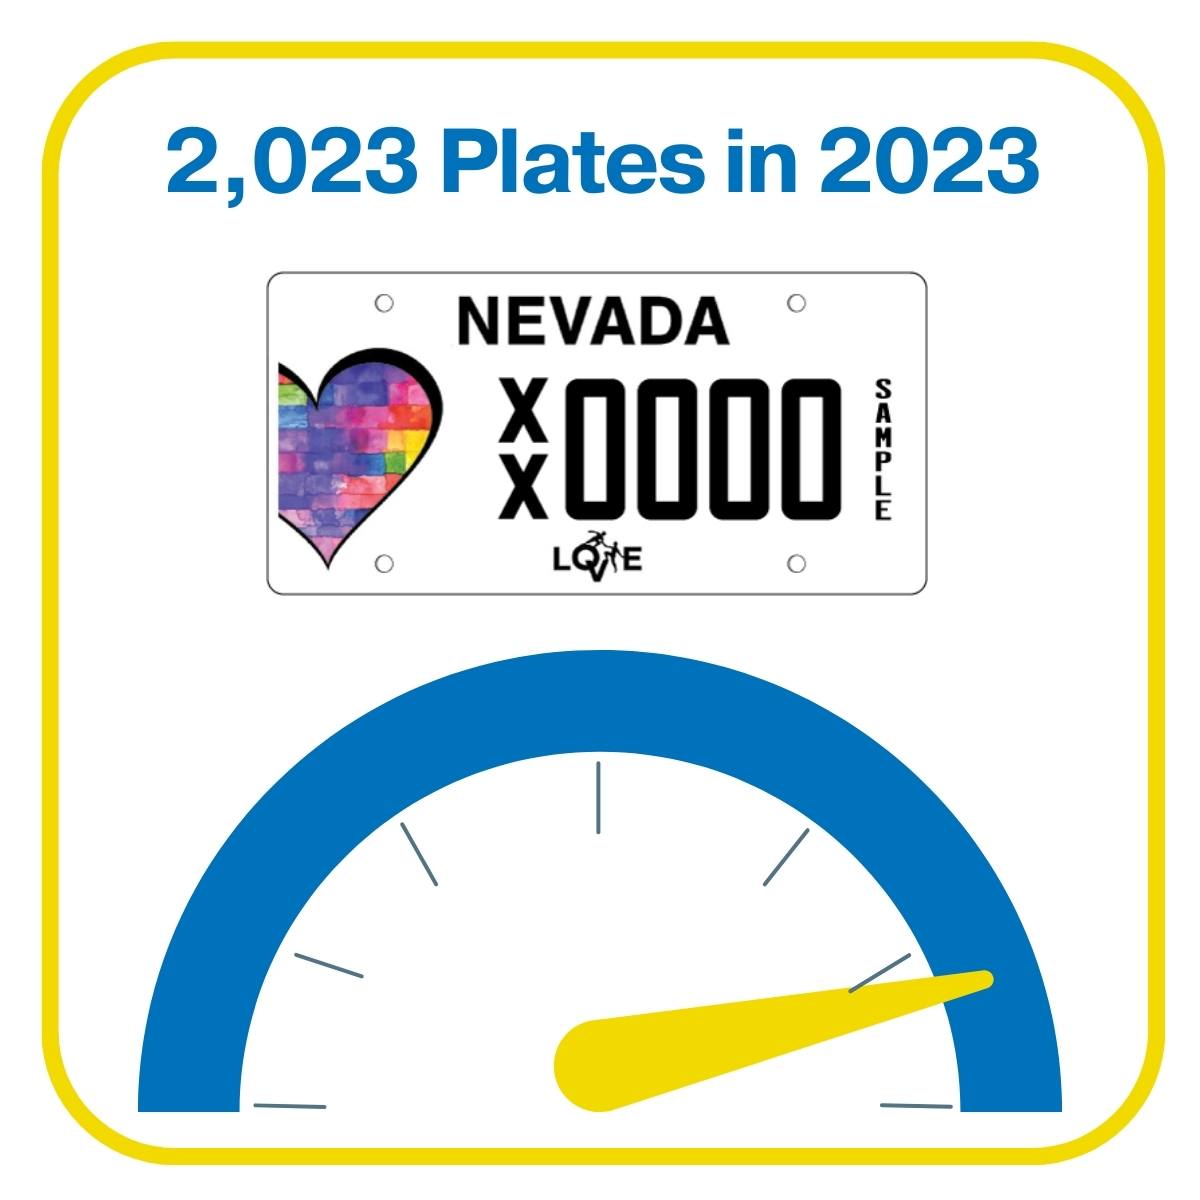 Text "2,023 Plates in 2023" with illustration of a Nevada license plate and speed gauge in the background.